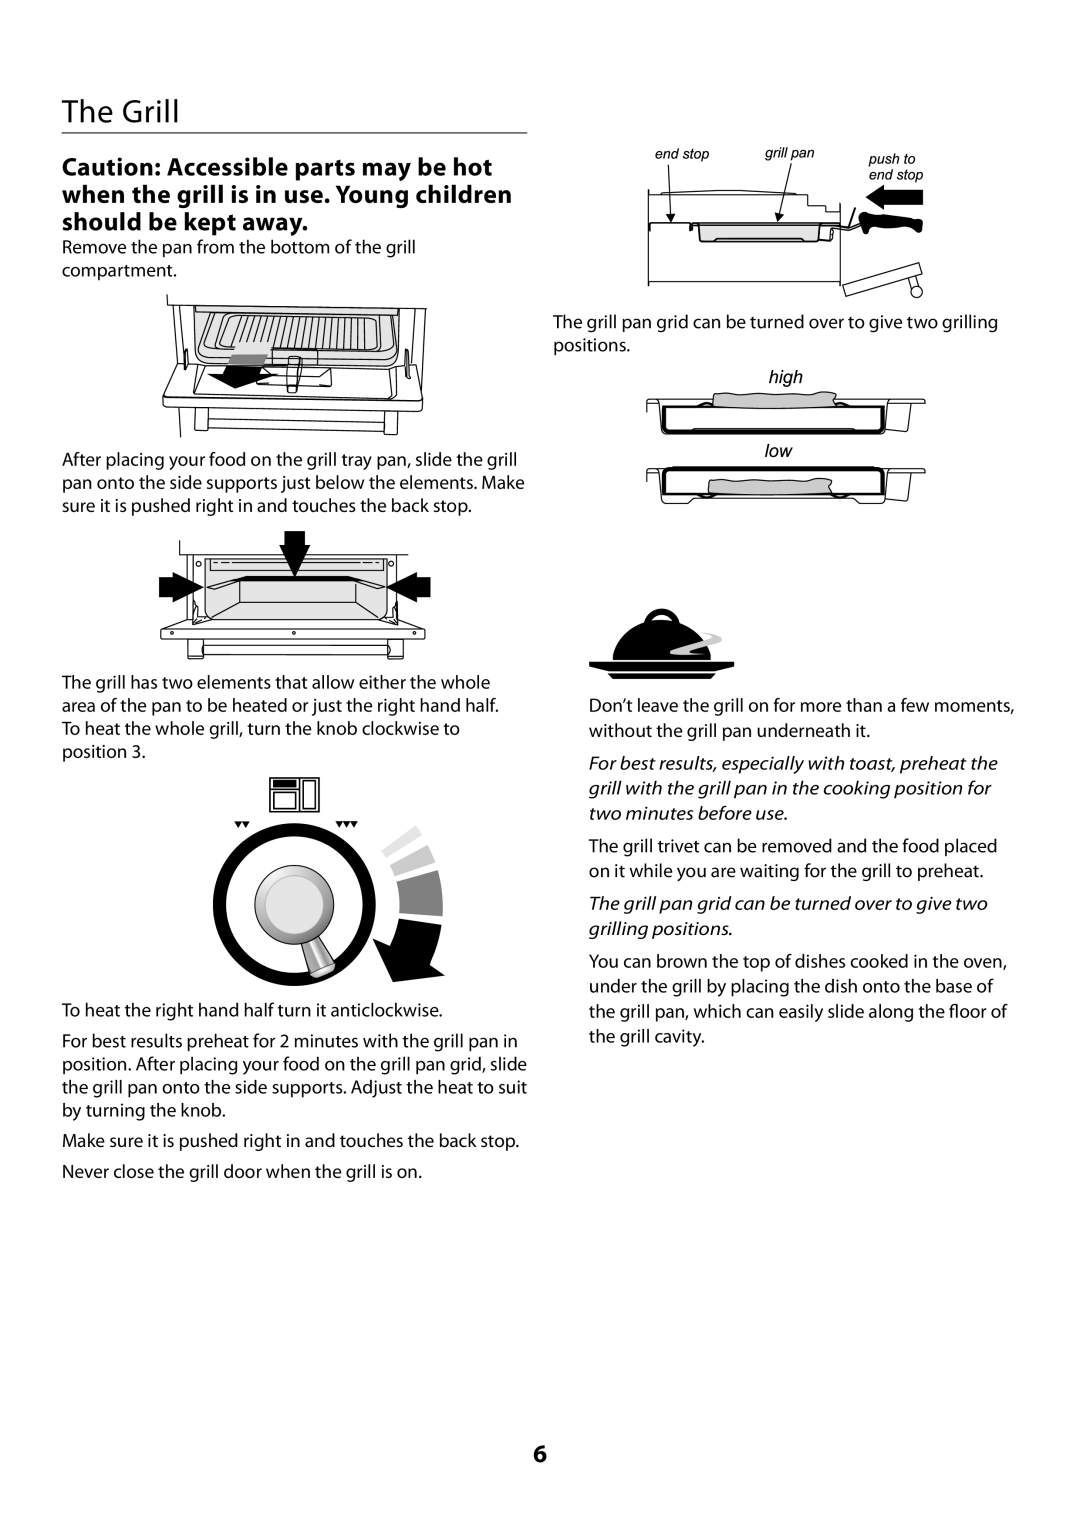 Rangemaster U109720 - 01 manual The Grill, The grill pan grid can be turned over to give two grilling positions 